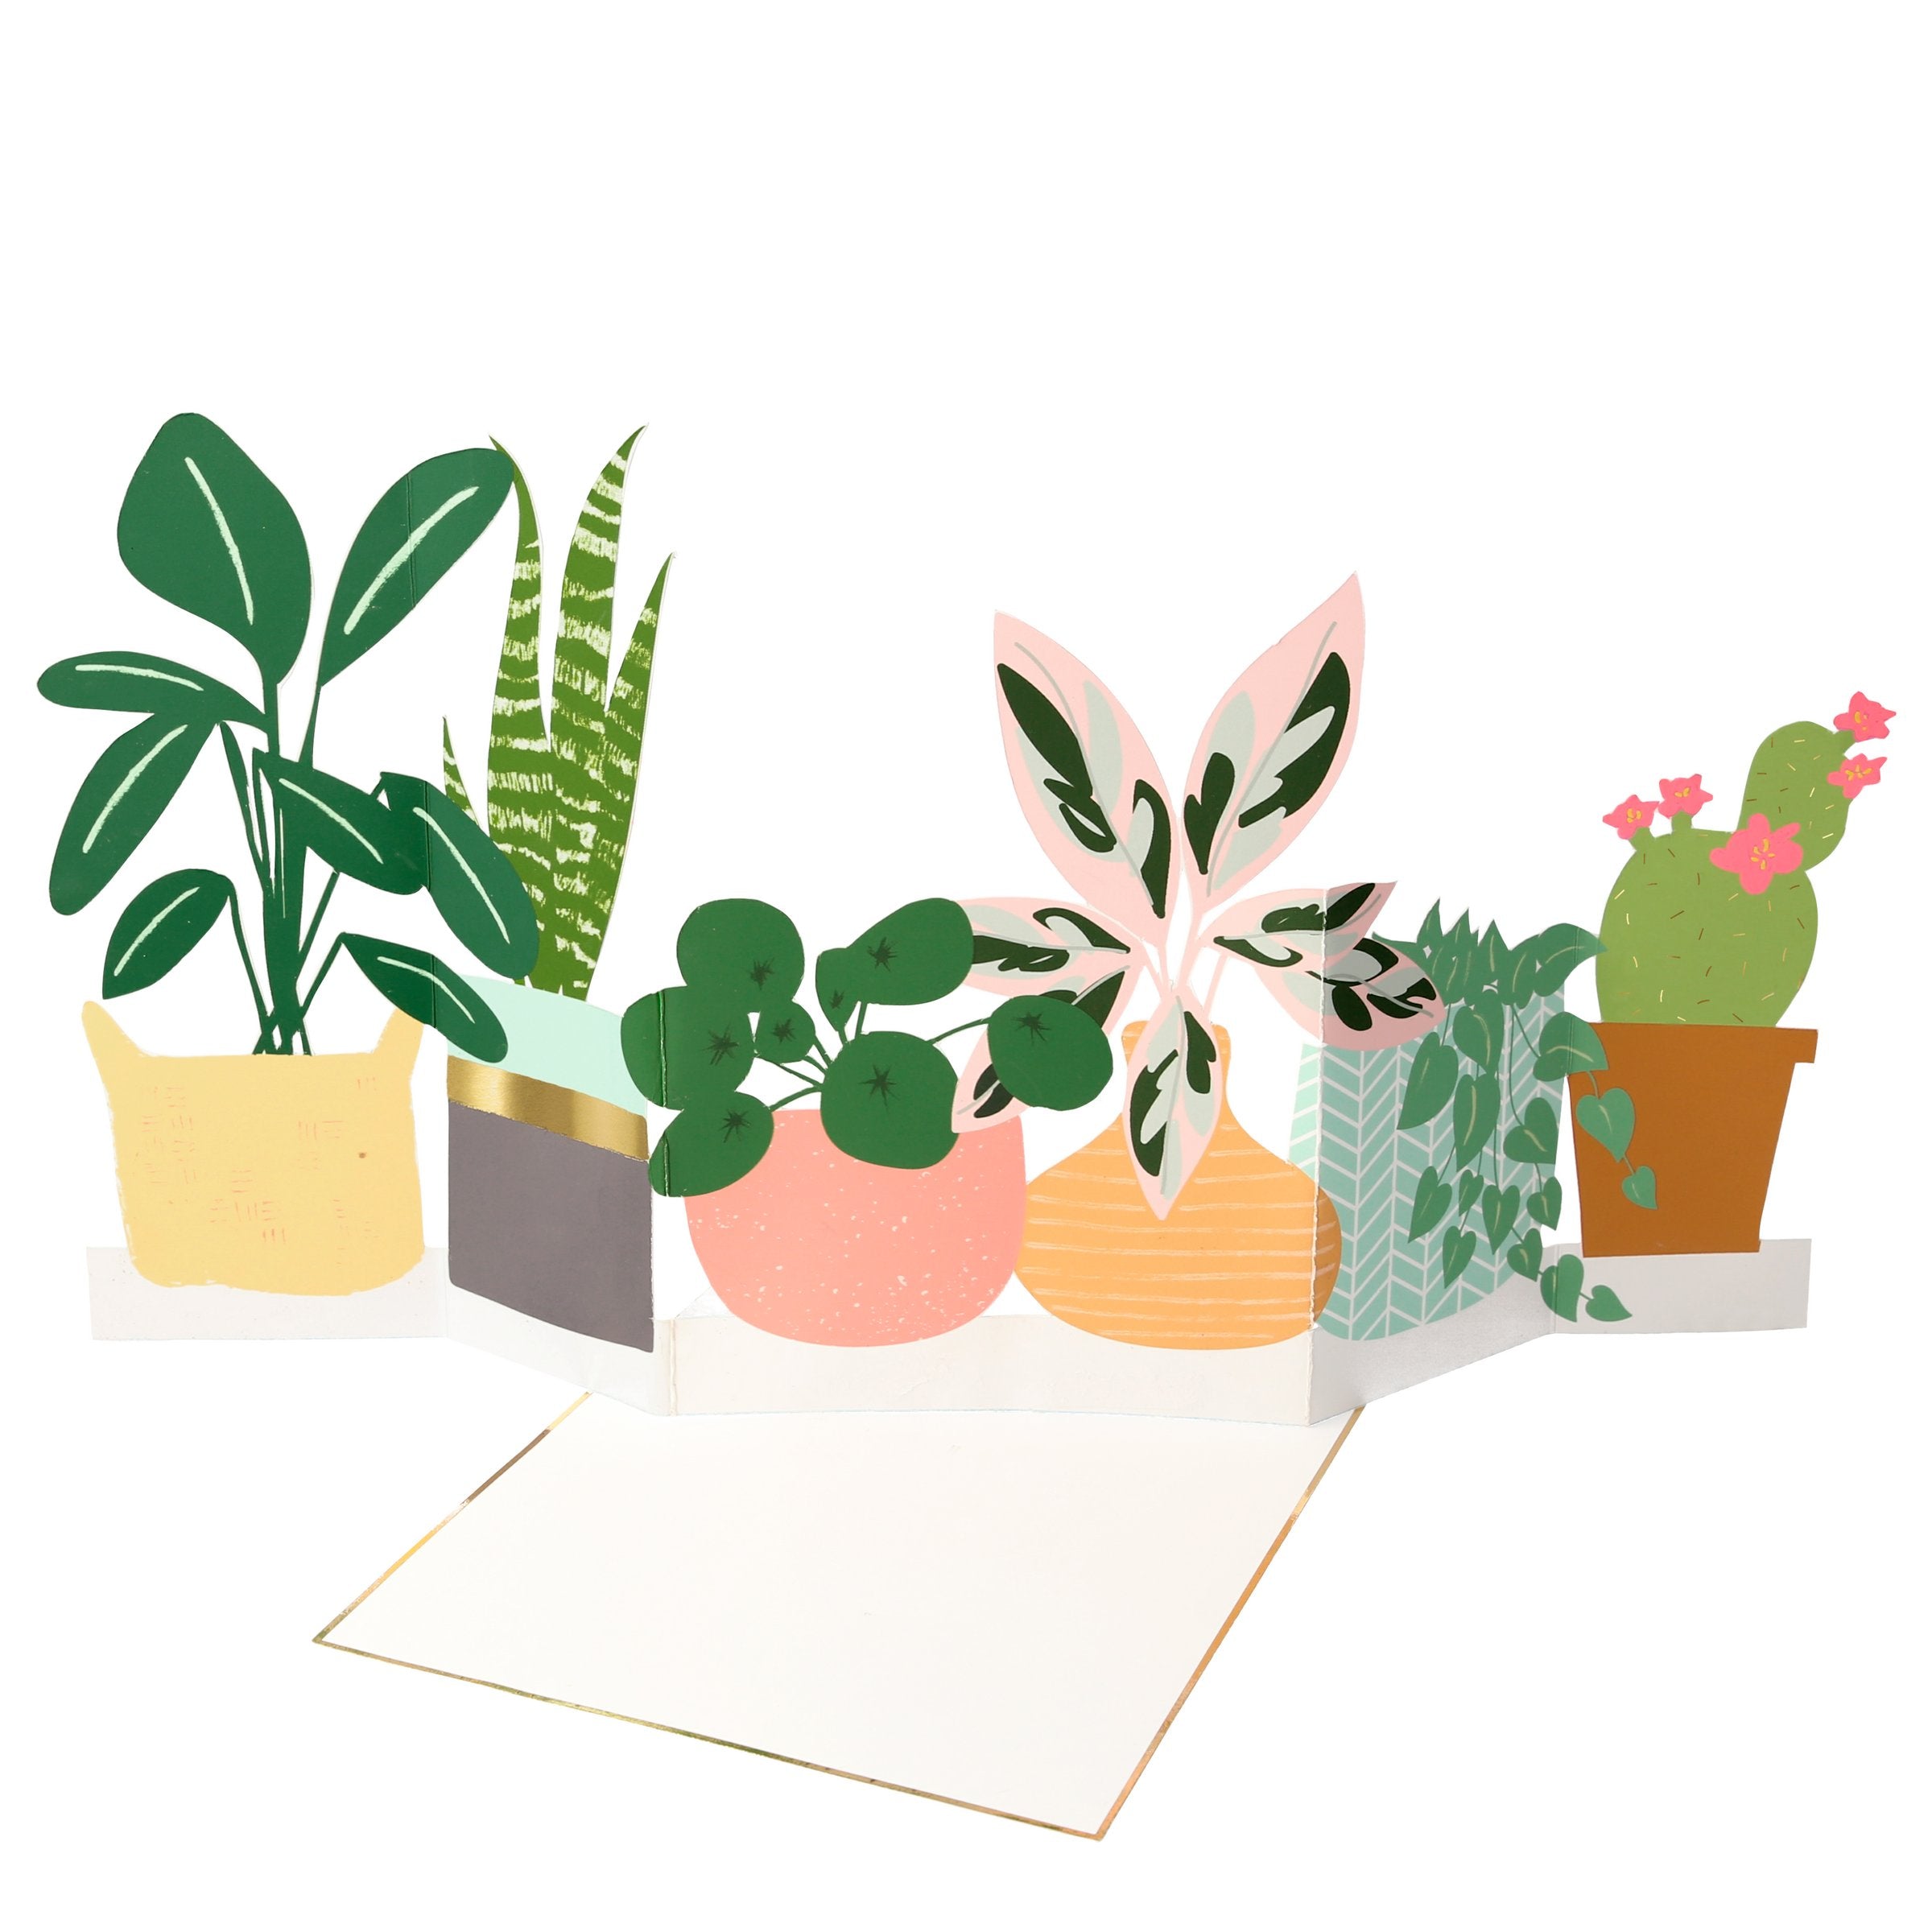 Send a message of your choice, in our blank card that opens up, to a special someone who loves plants.